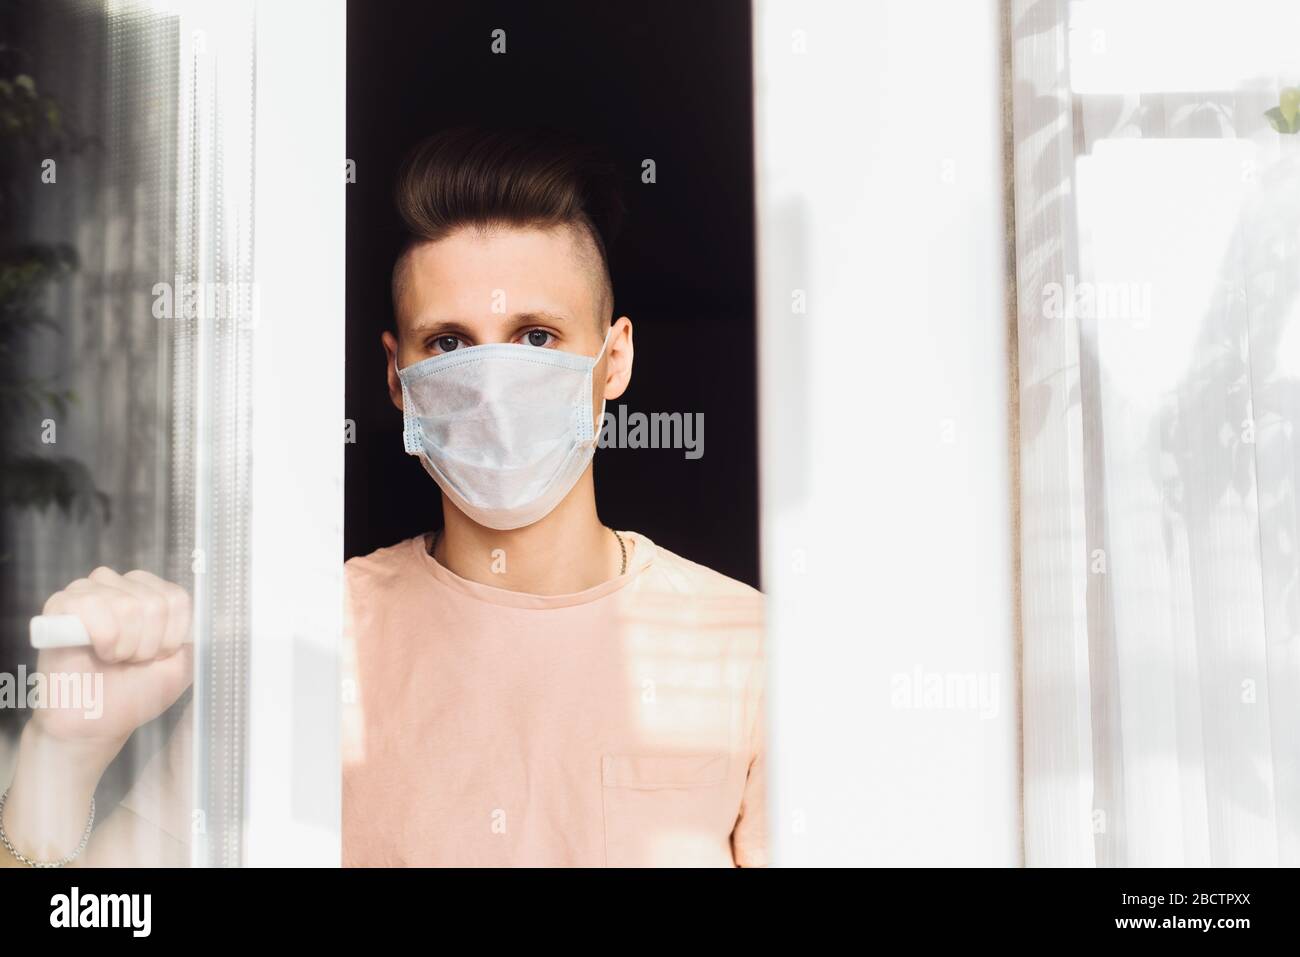 Handsome young man in a protective mask stands at home outside the window. A call for self-isolation due to a pandemic and the risk of coronavirus infection. Stock Photo